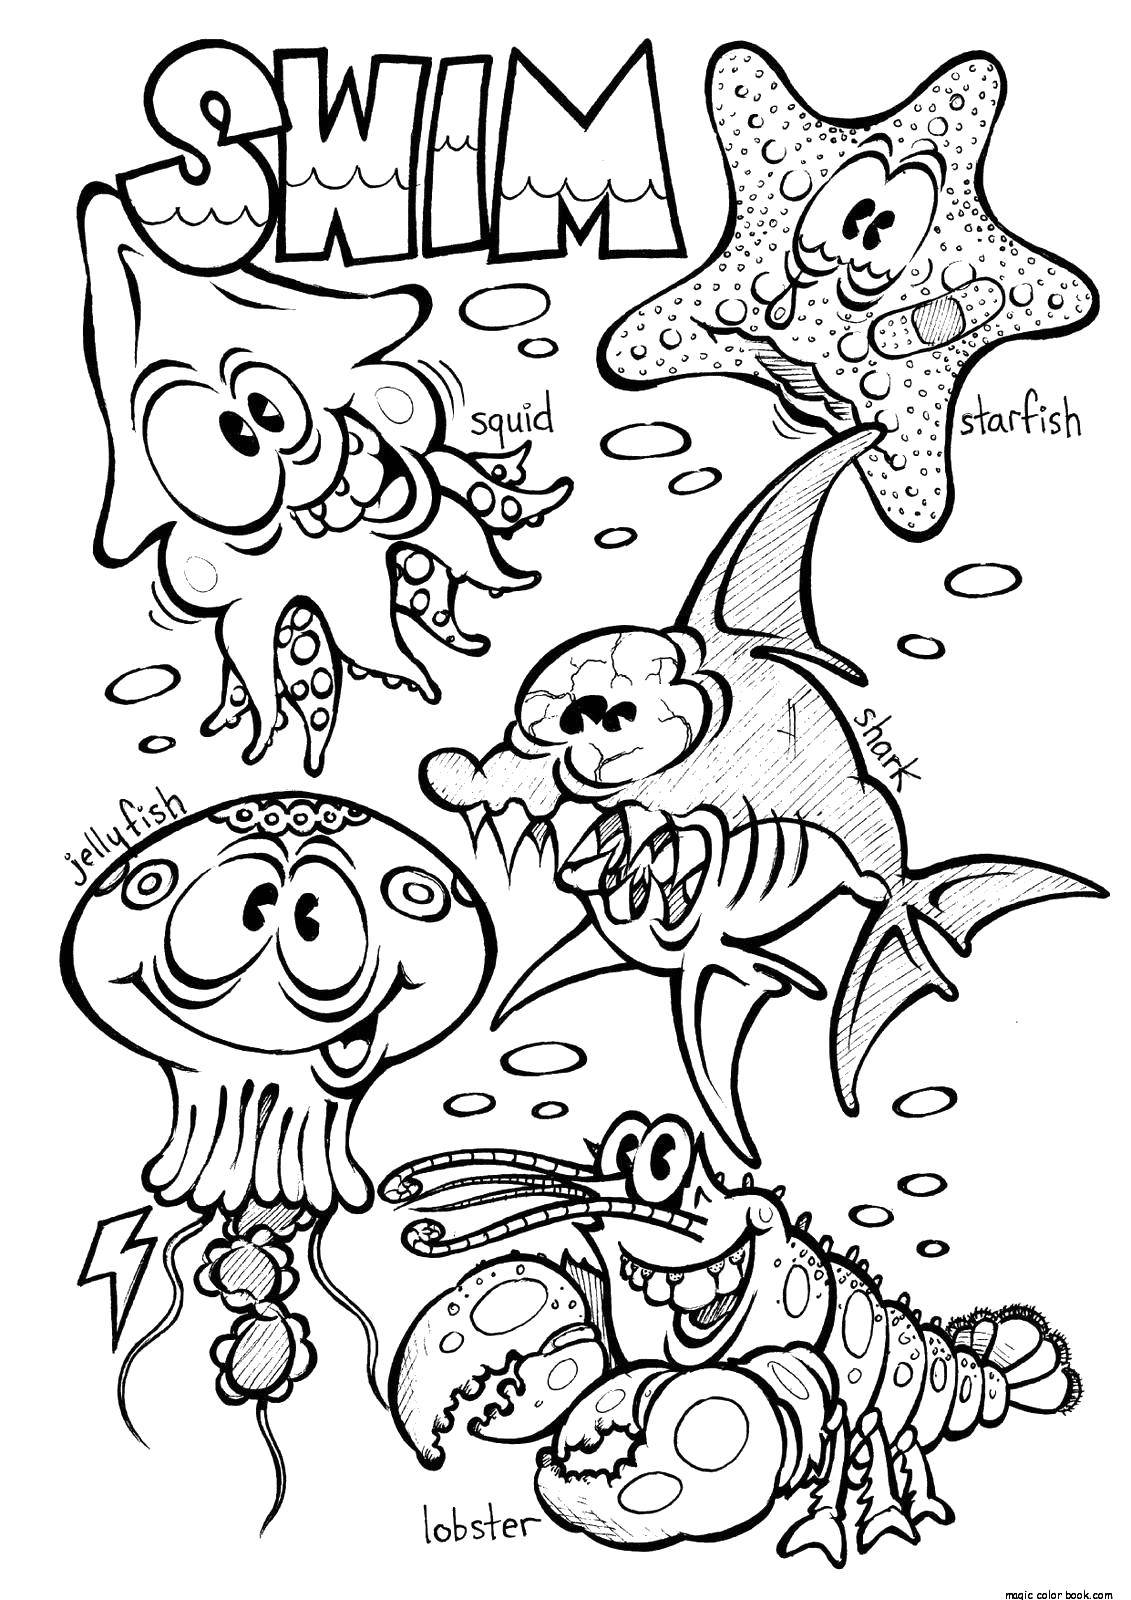 Coloring The inhabitants of the sea in English. Category English. Tags:  English.